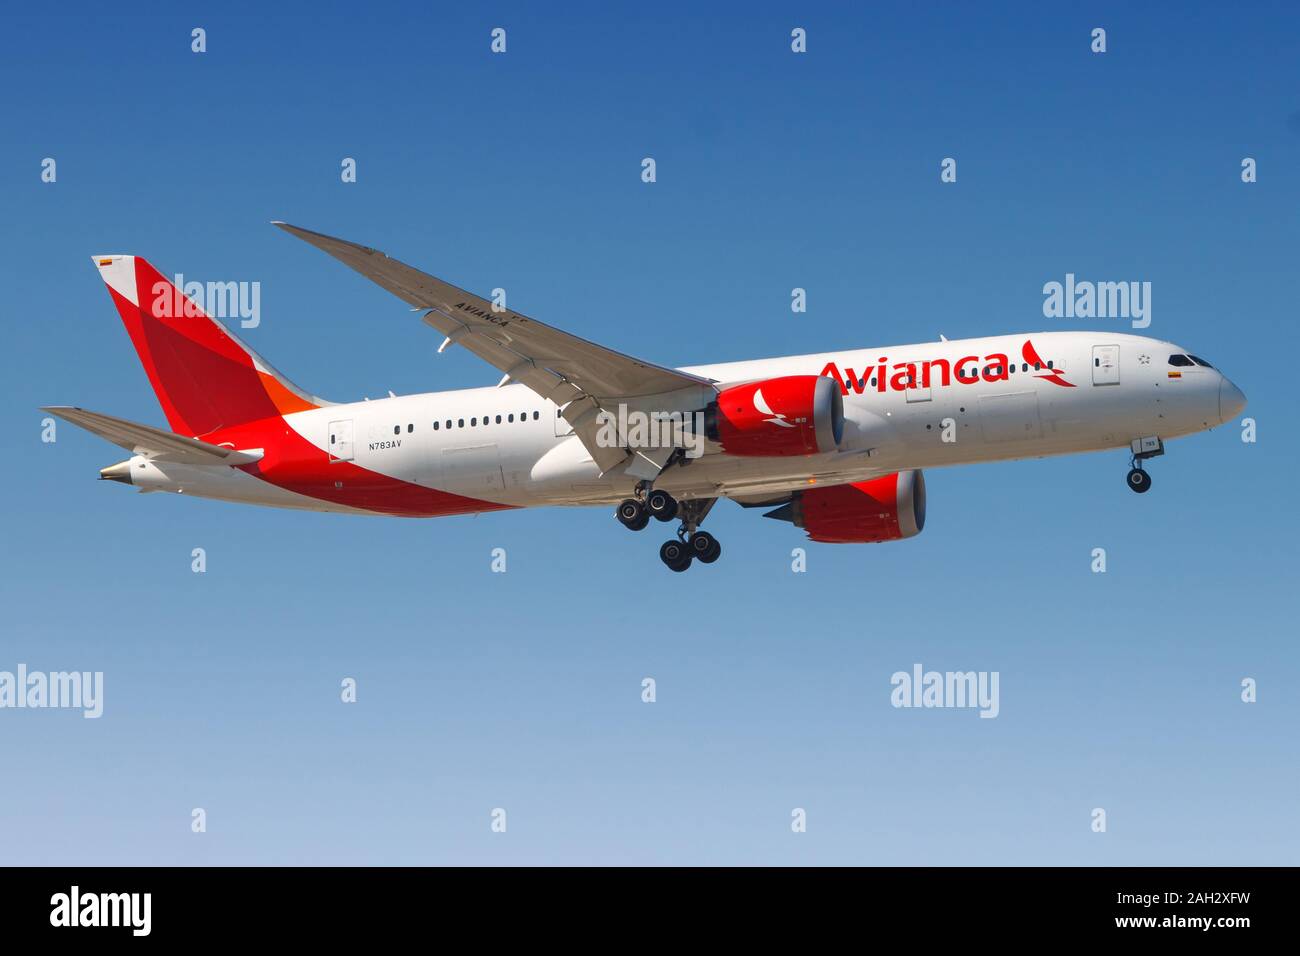 Madrid, Spain - April 10, 2017: Avianca Boeing 787 airplane at Madrid airport (MAD) in Spain. Boeing is an aircraft manufacturer based in Seattle, Was Stock Photo